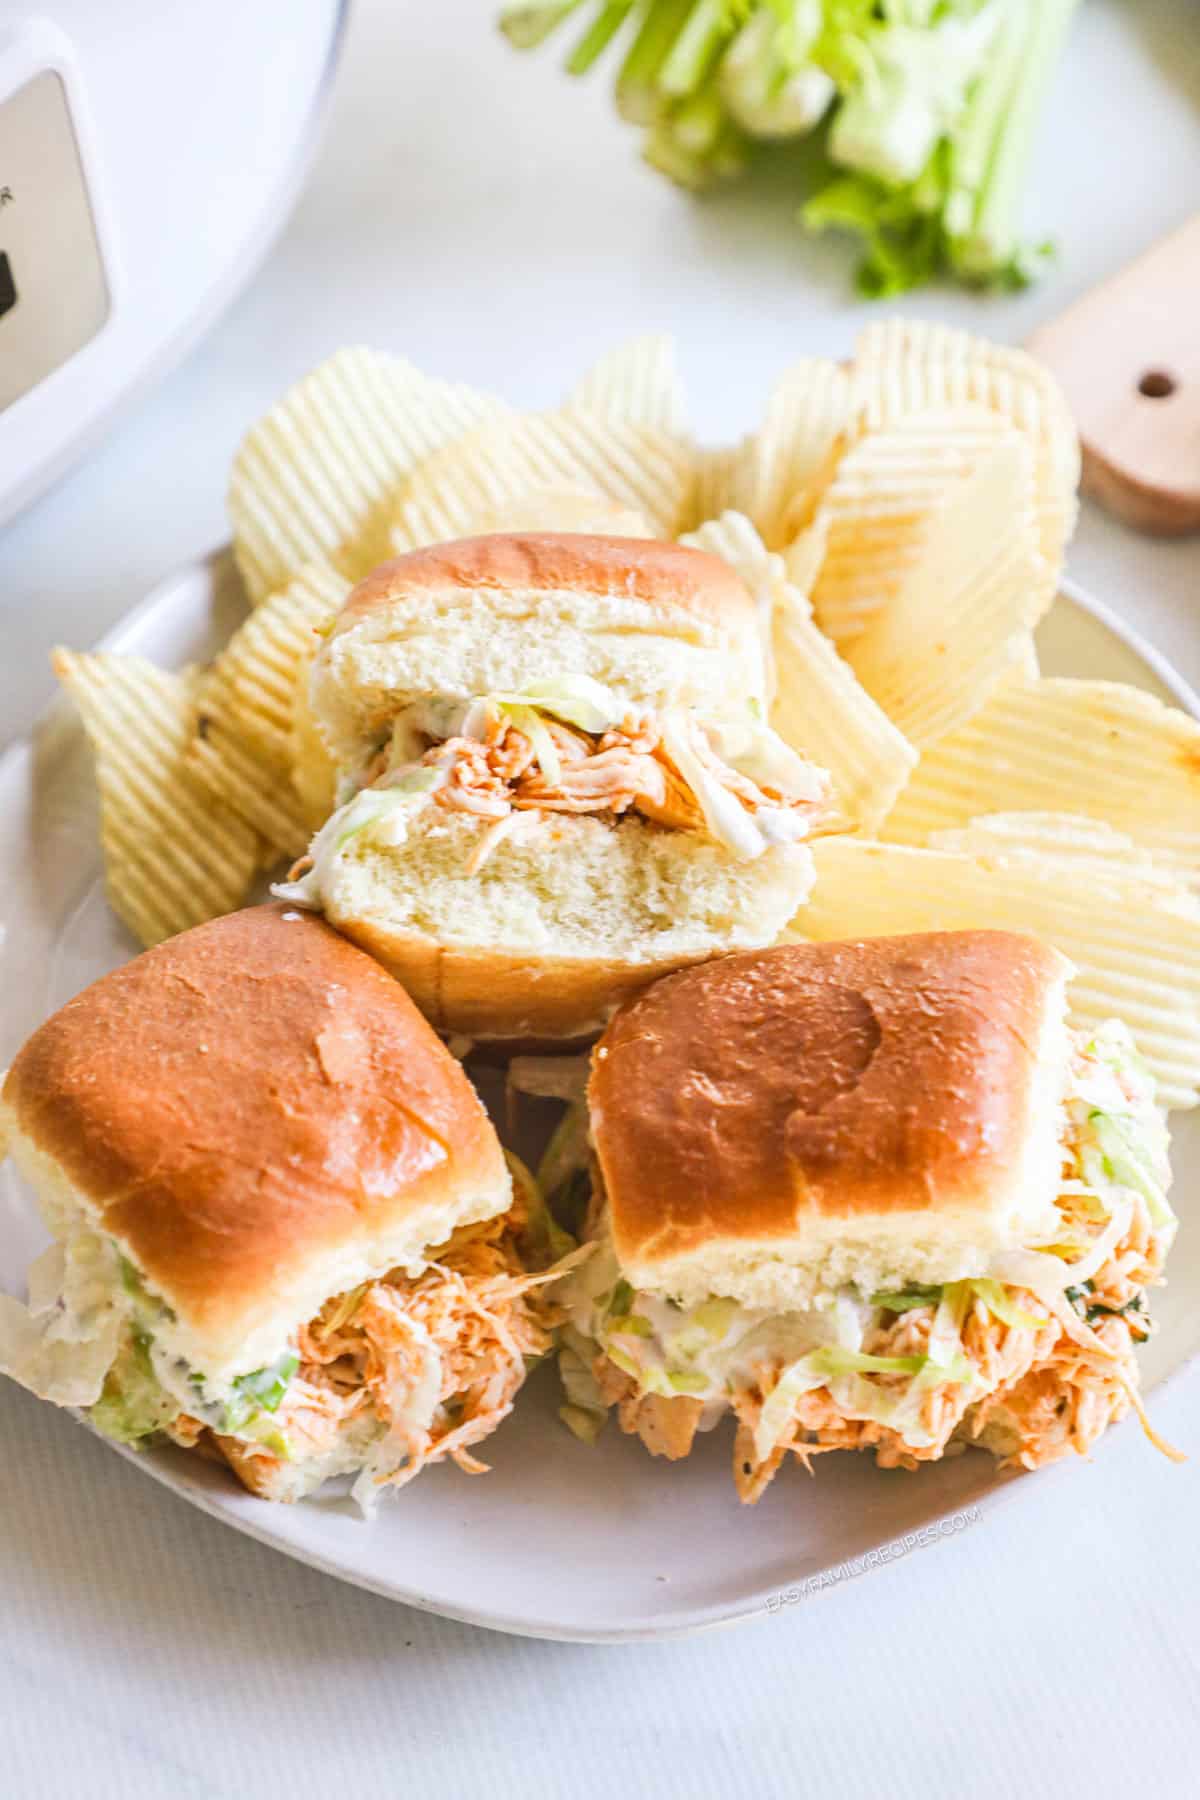 A platter of shredded buffalo chicken sliders on a plate with potato chips.